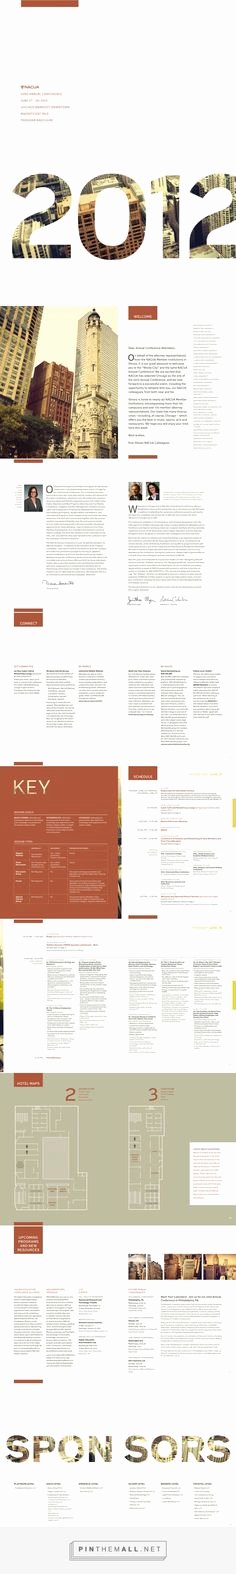 Conference Program Booklet Template Awesome Conference Program Booklet Template Registration Program